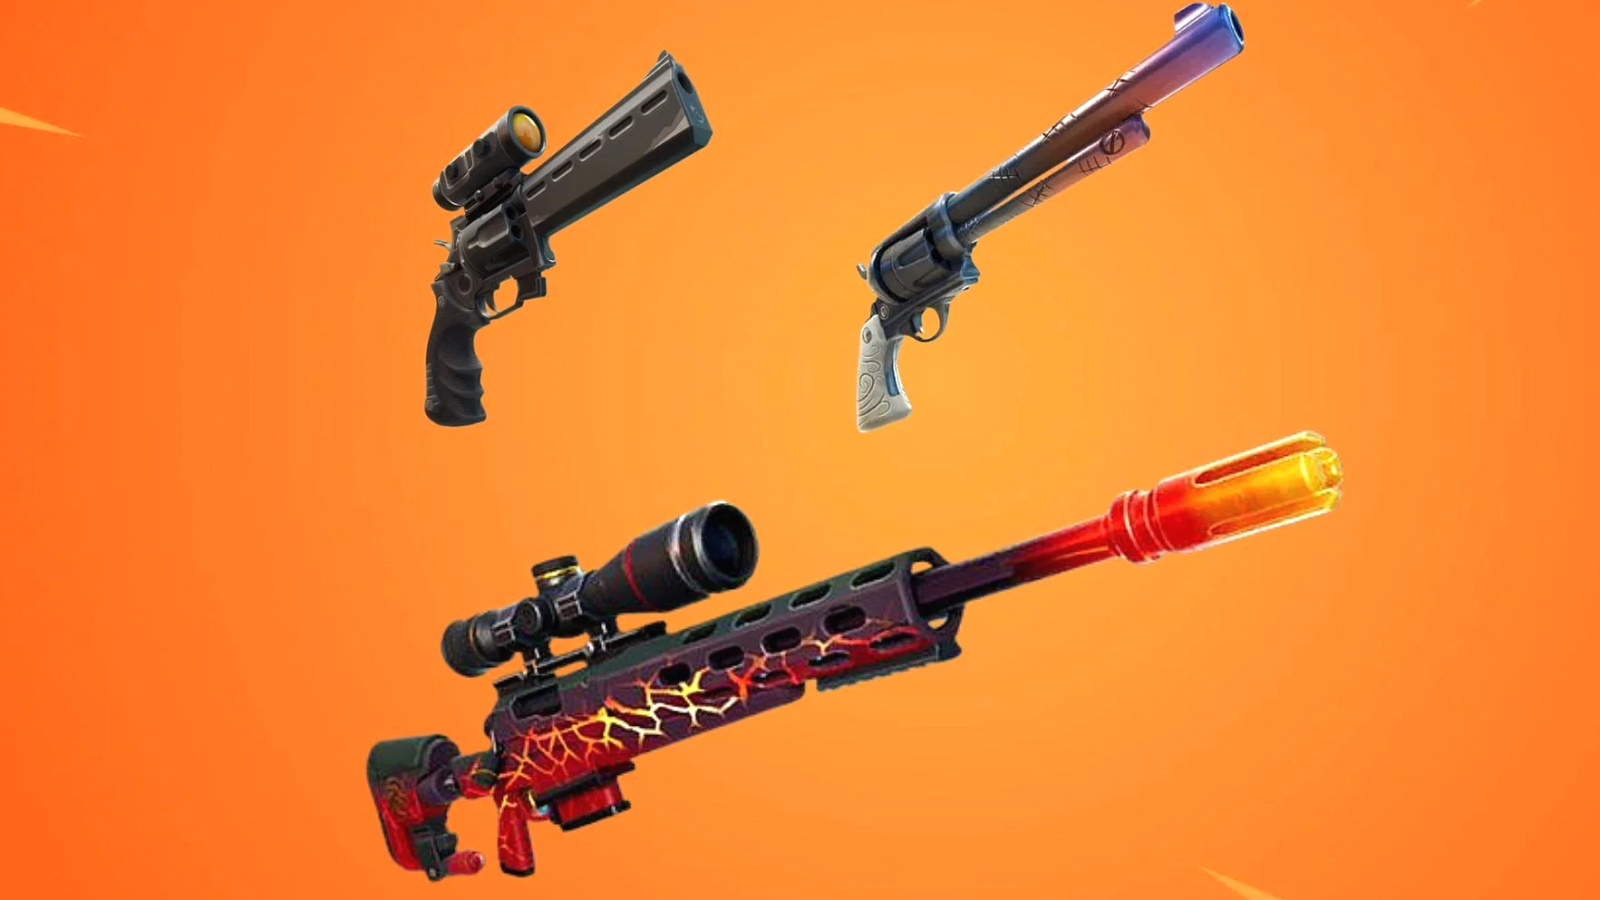 A Powerful New Sniper Rifle Is Coming Soon To 'Fortnite: Battle